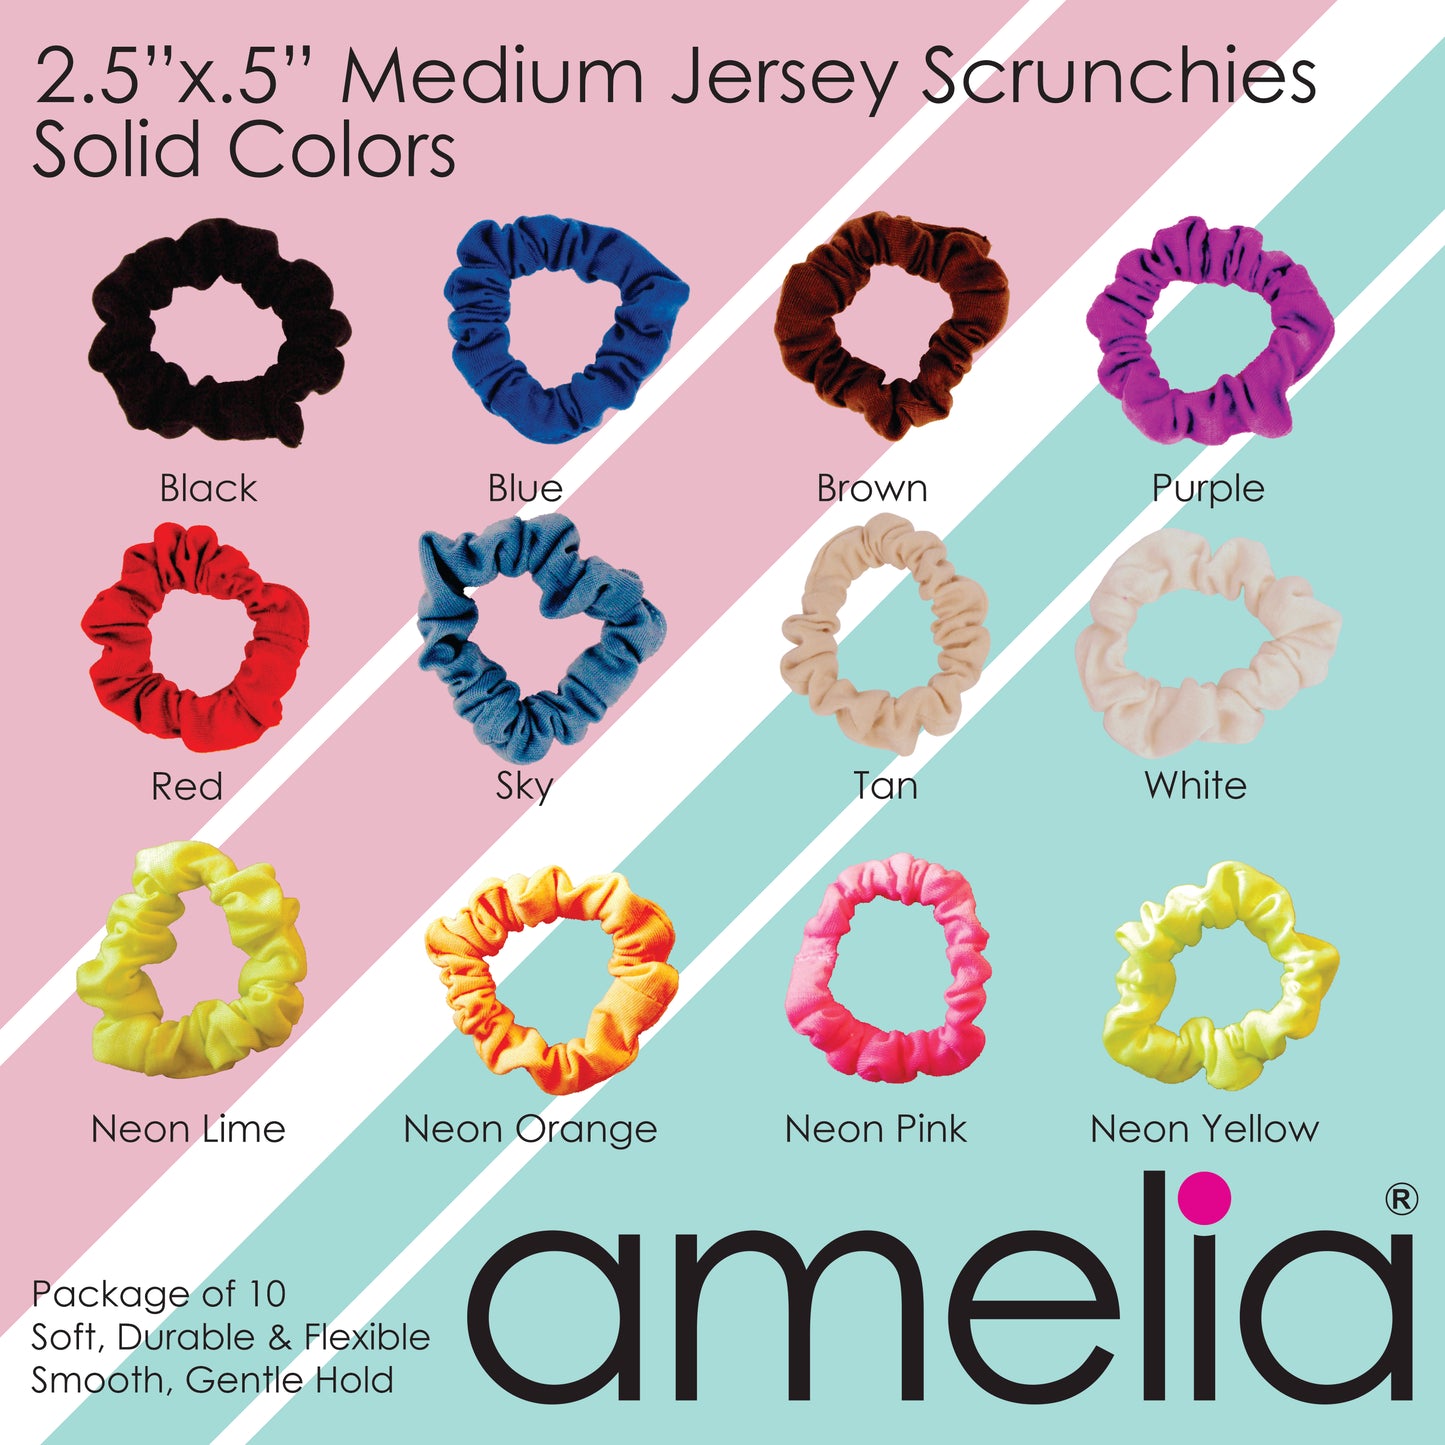 Amelia Beauty, Medium Purple Jersey Scrunchies, 2.5in Diameter, Gentle on Hair, Strong Hold, No Snag, No Dents or Creases. 10 Pack